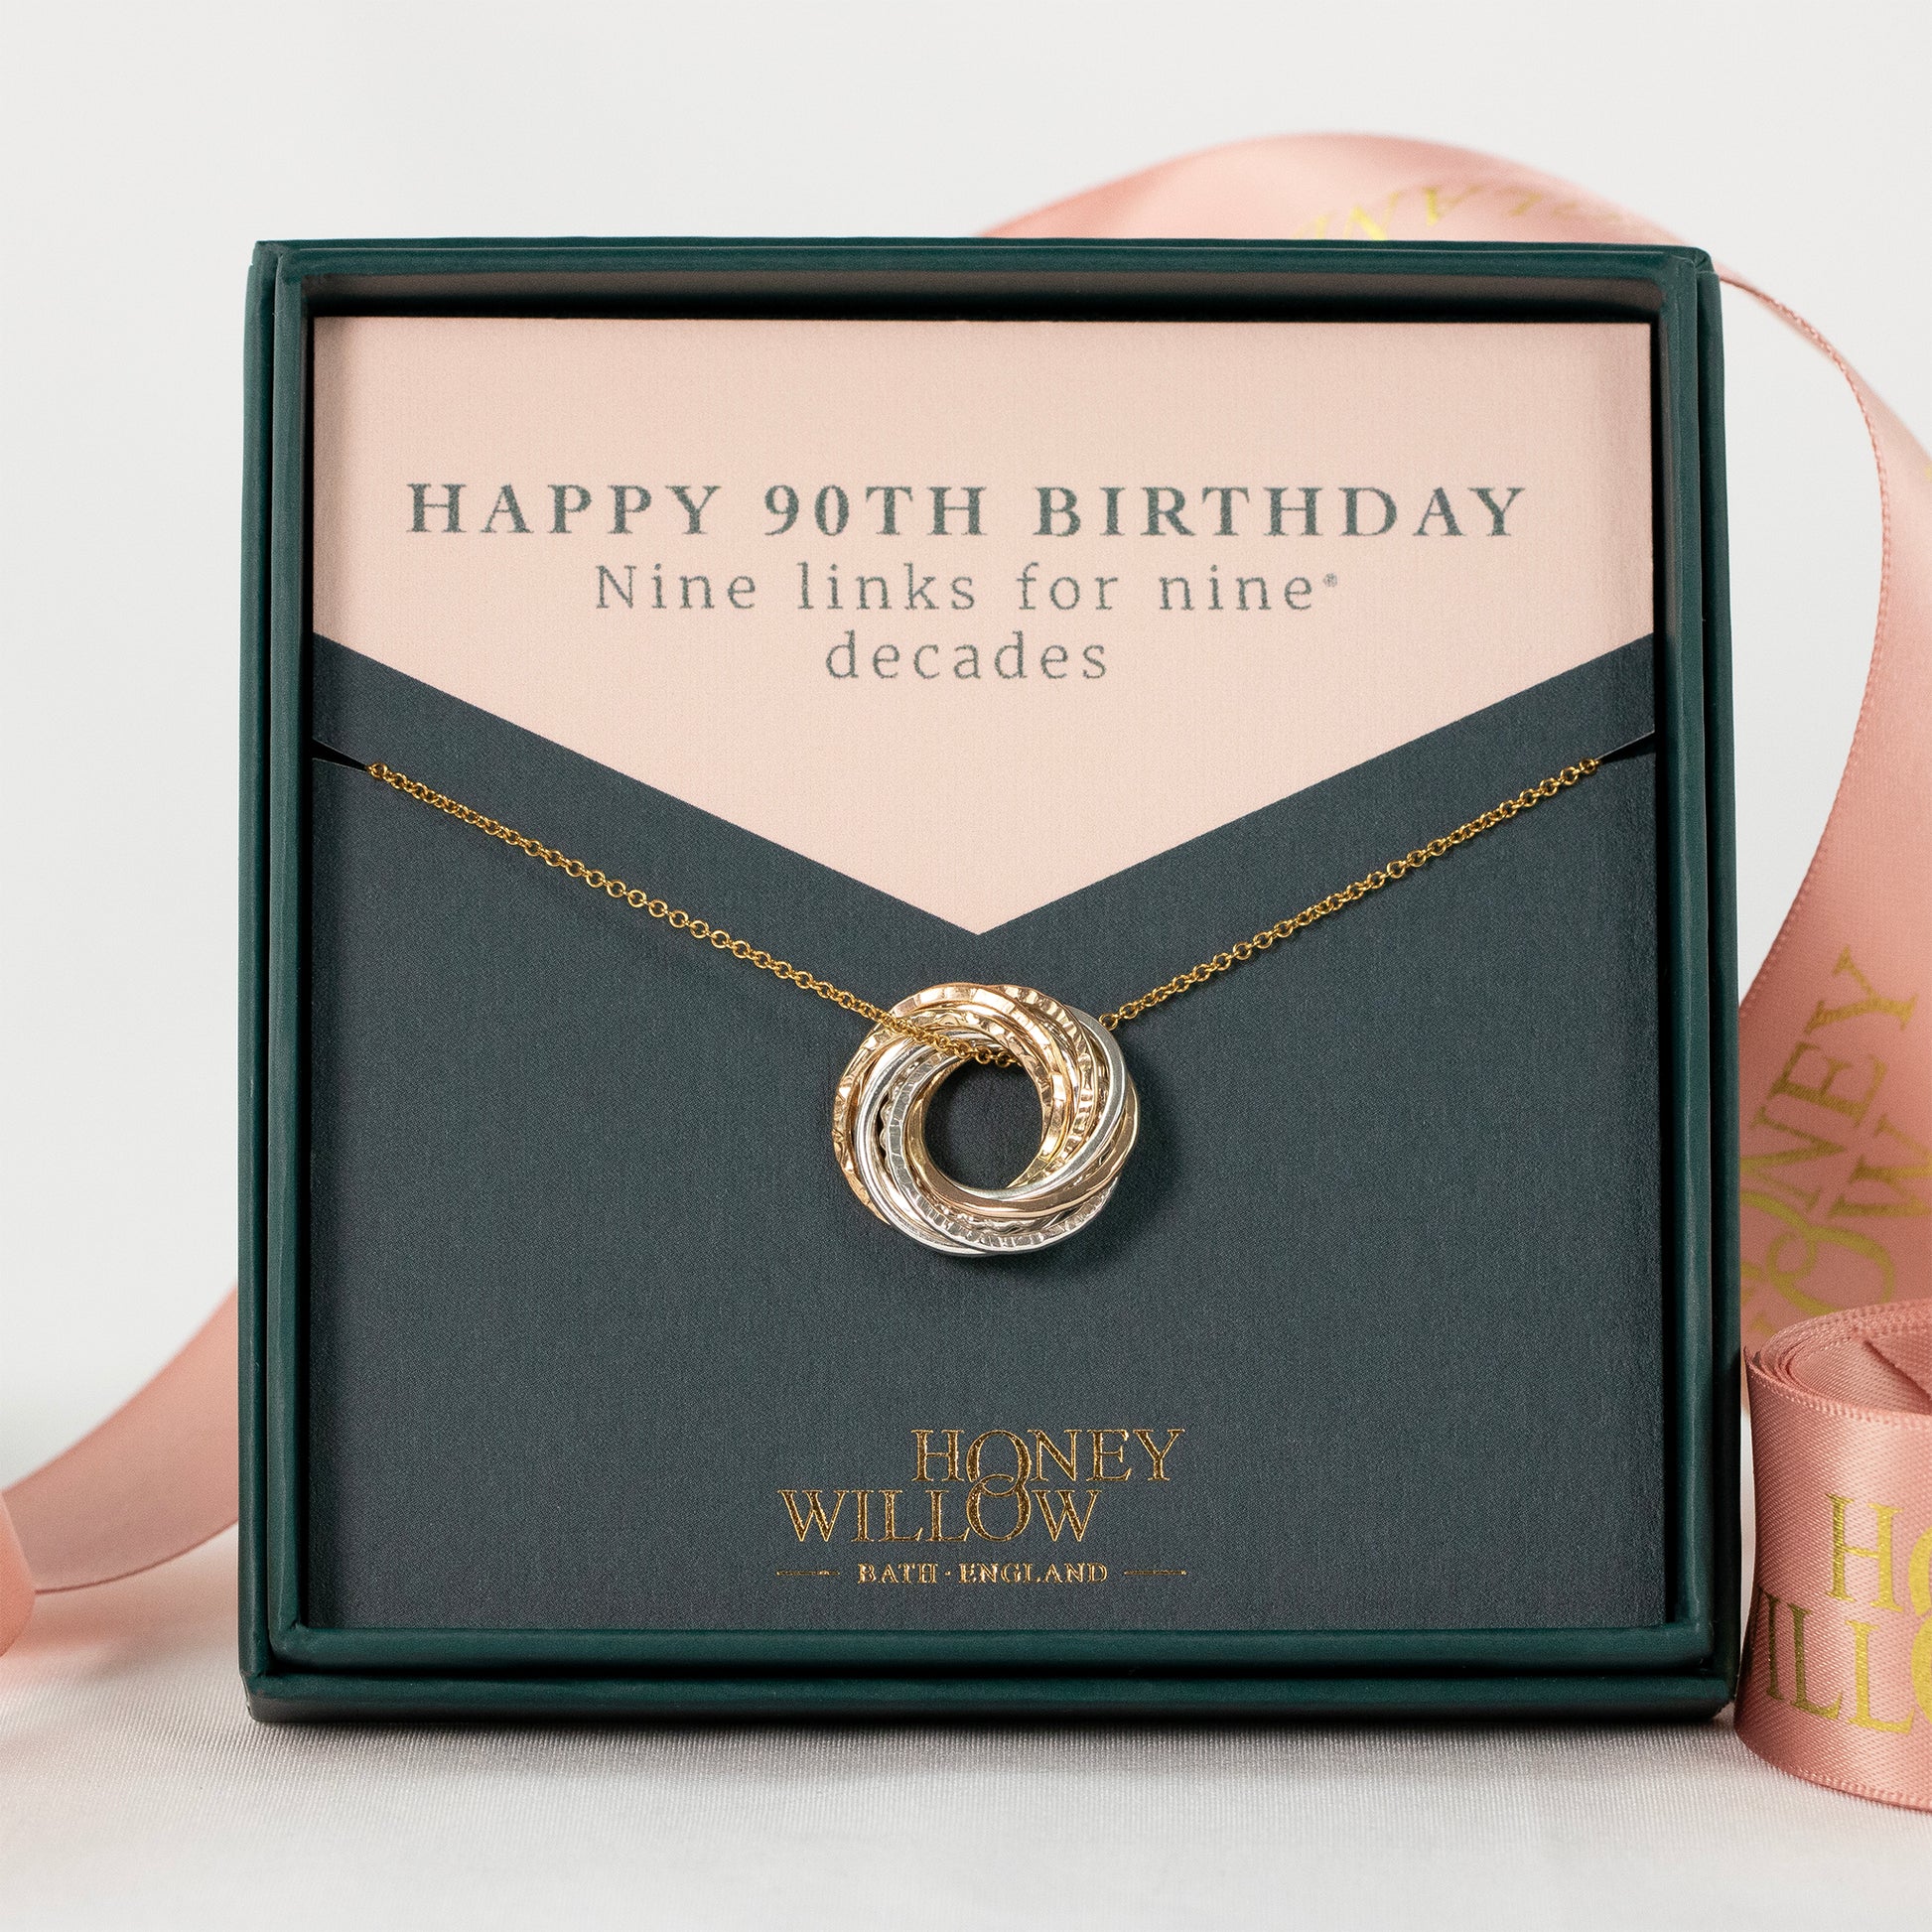 90th Birthday Necklace - The Original 9 Links for 9 Decades Necklace - Petite Silver & Gold